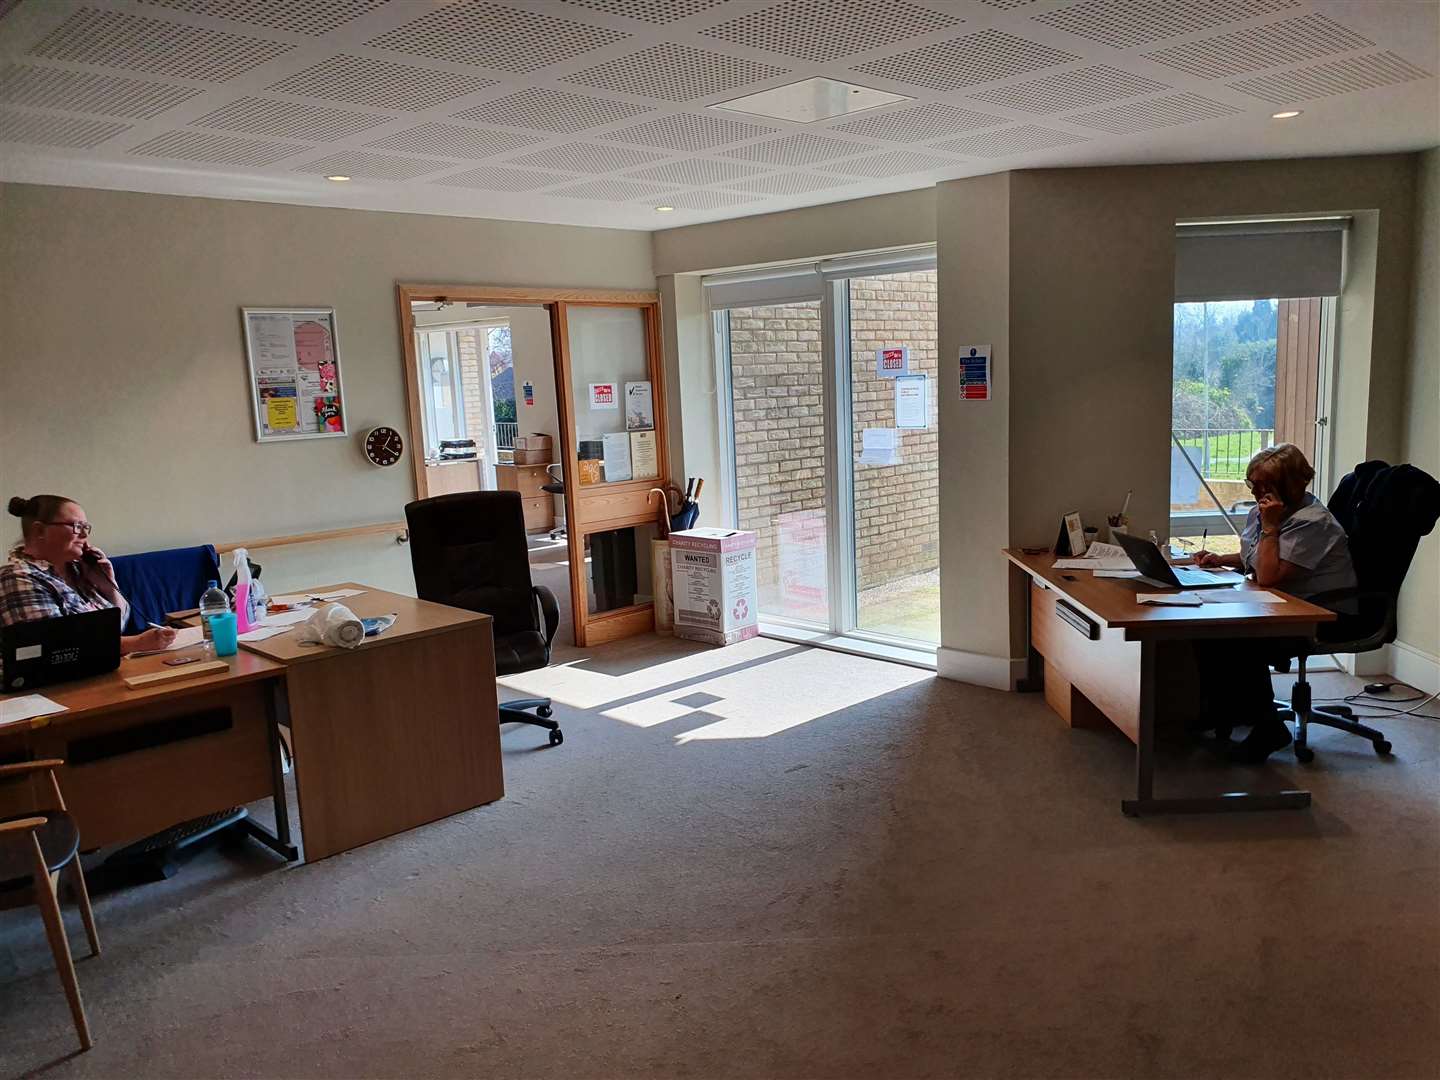 The office layout at Age UK's Ashford base has had to change in order to follow distancing guidance